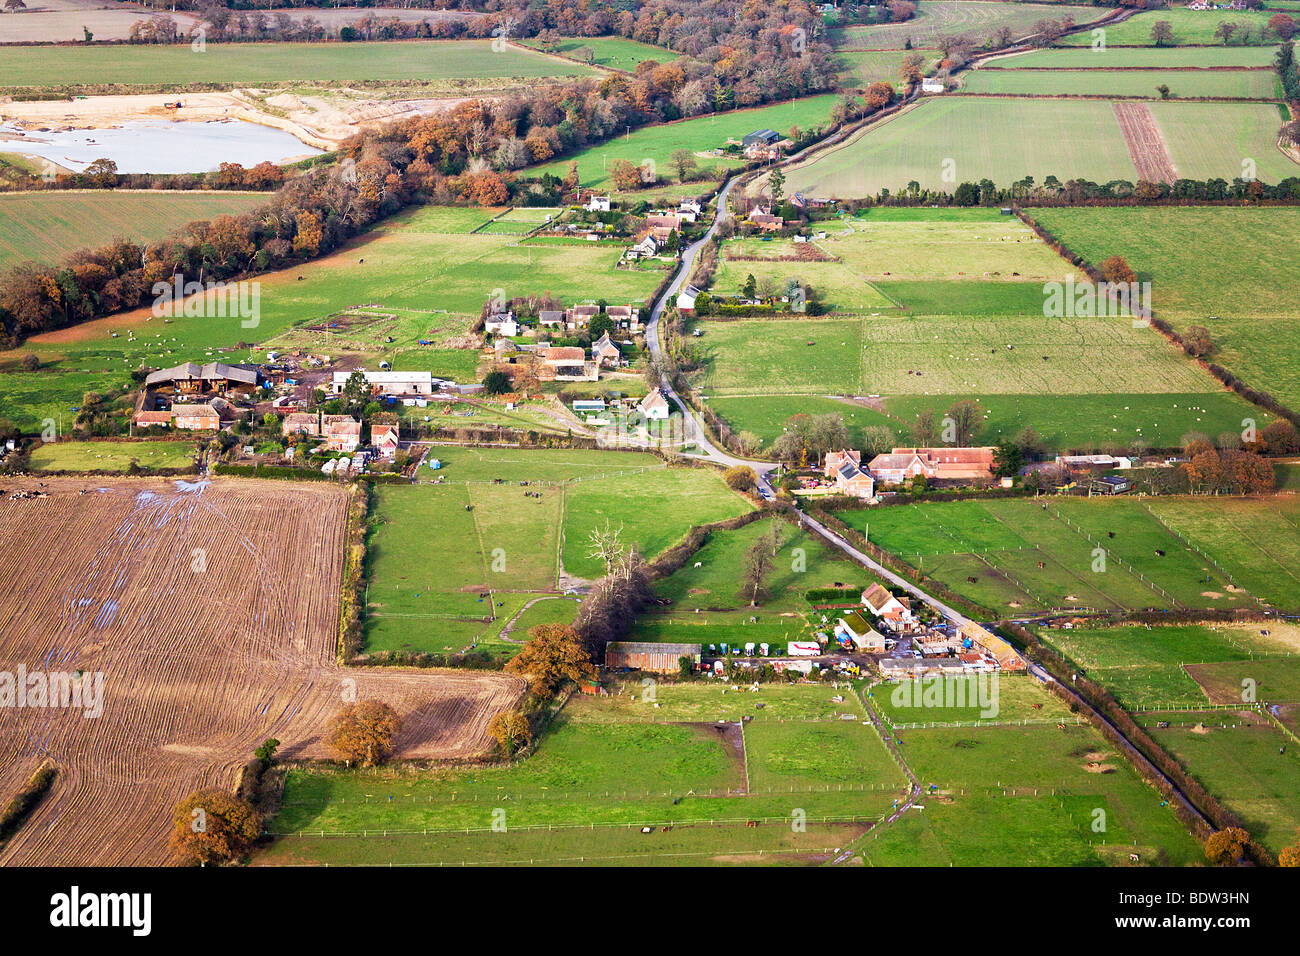 Aerial view of farms, farmland and fields. Border of Hampshire and Dorset. UK. Autumn colours. Stock Photo